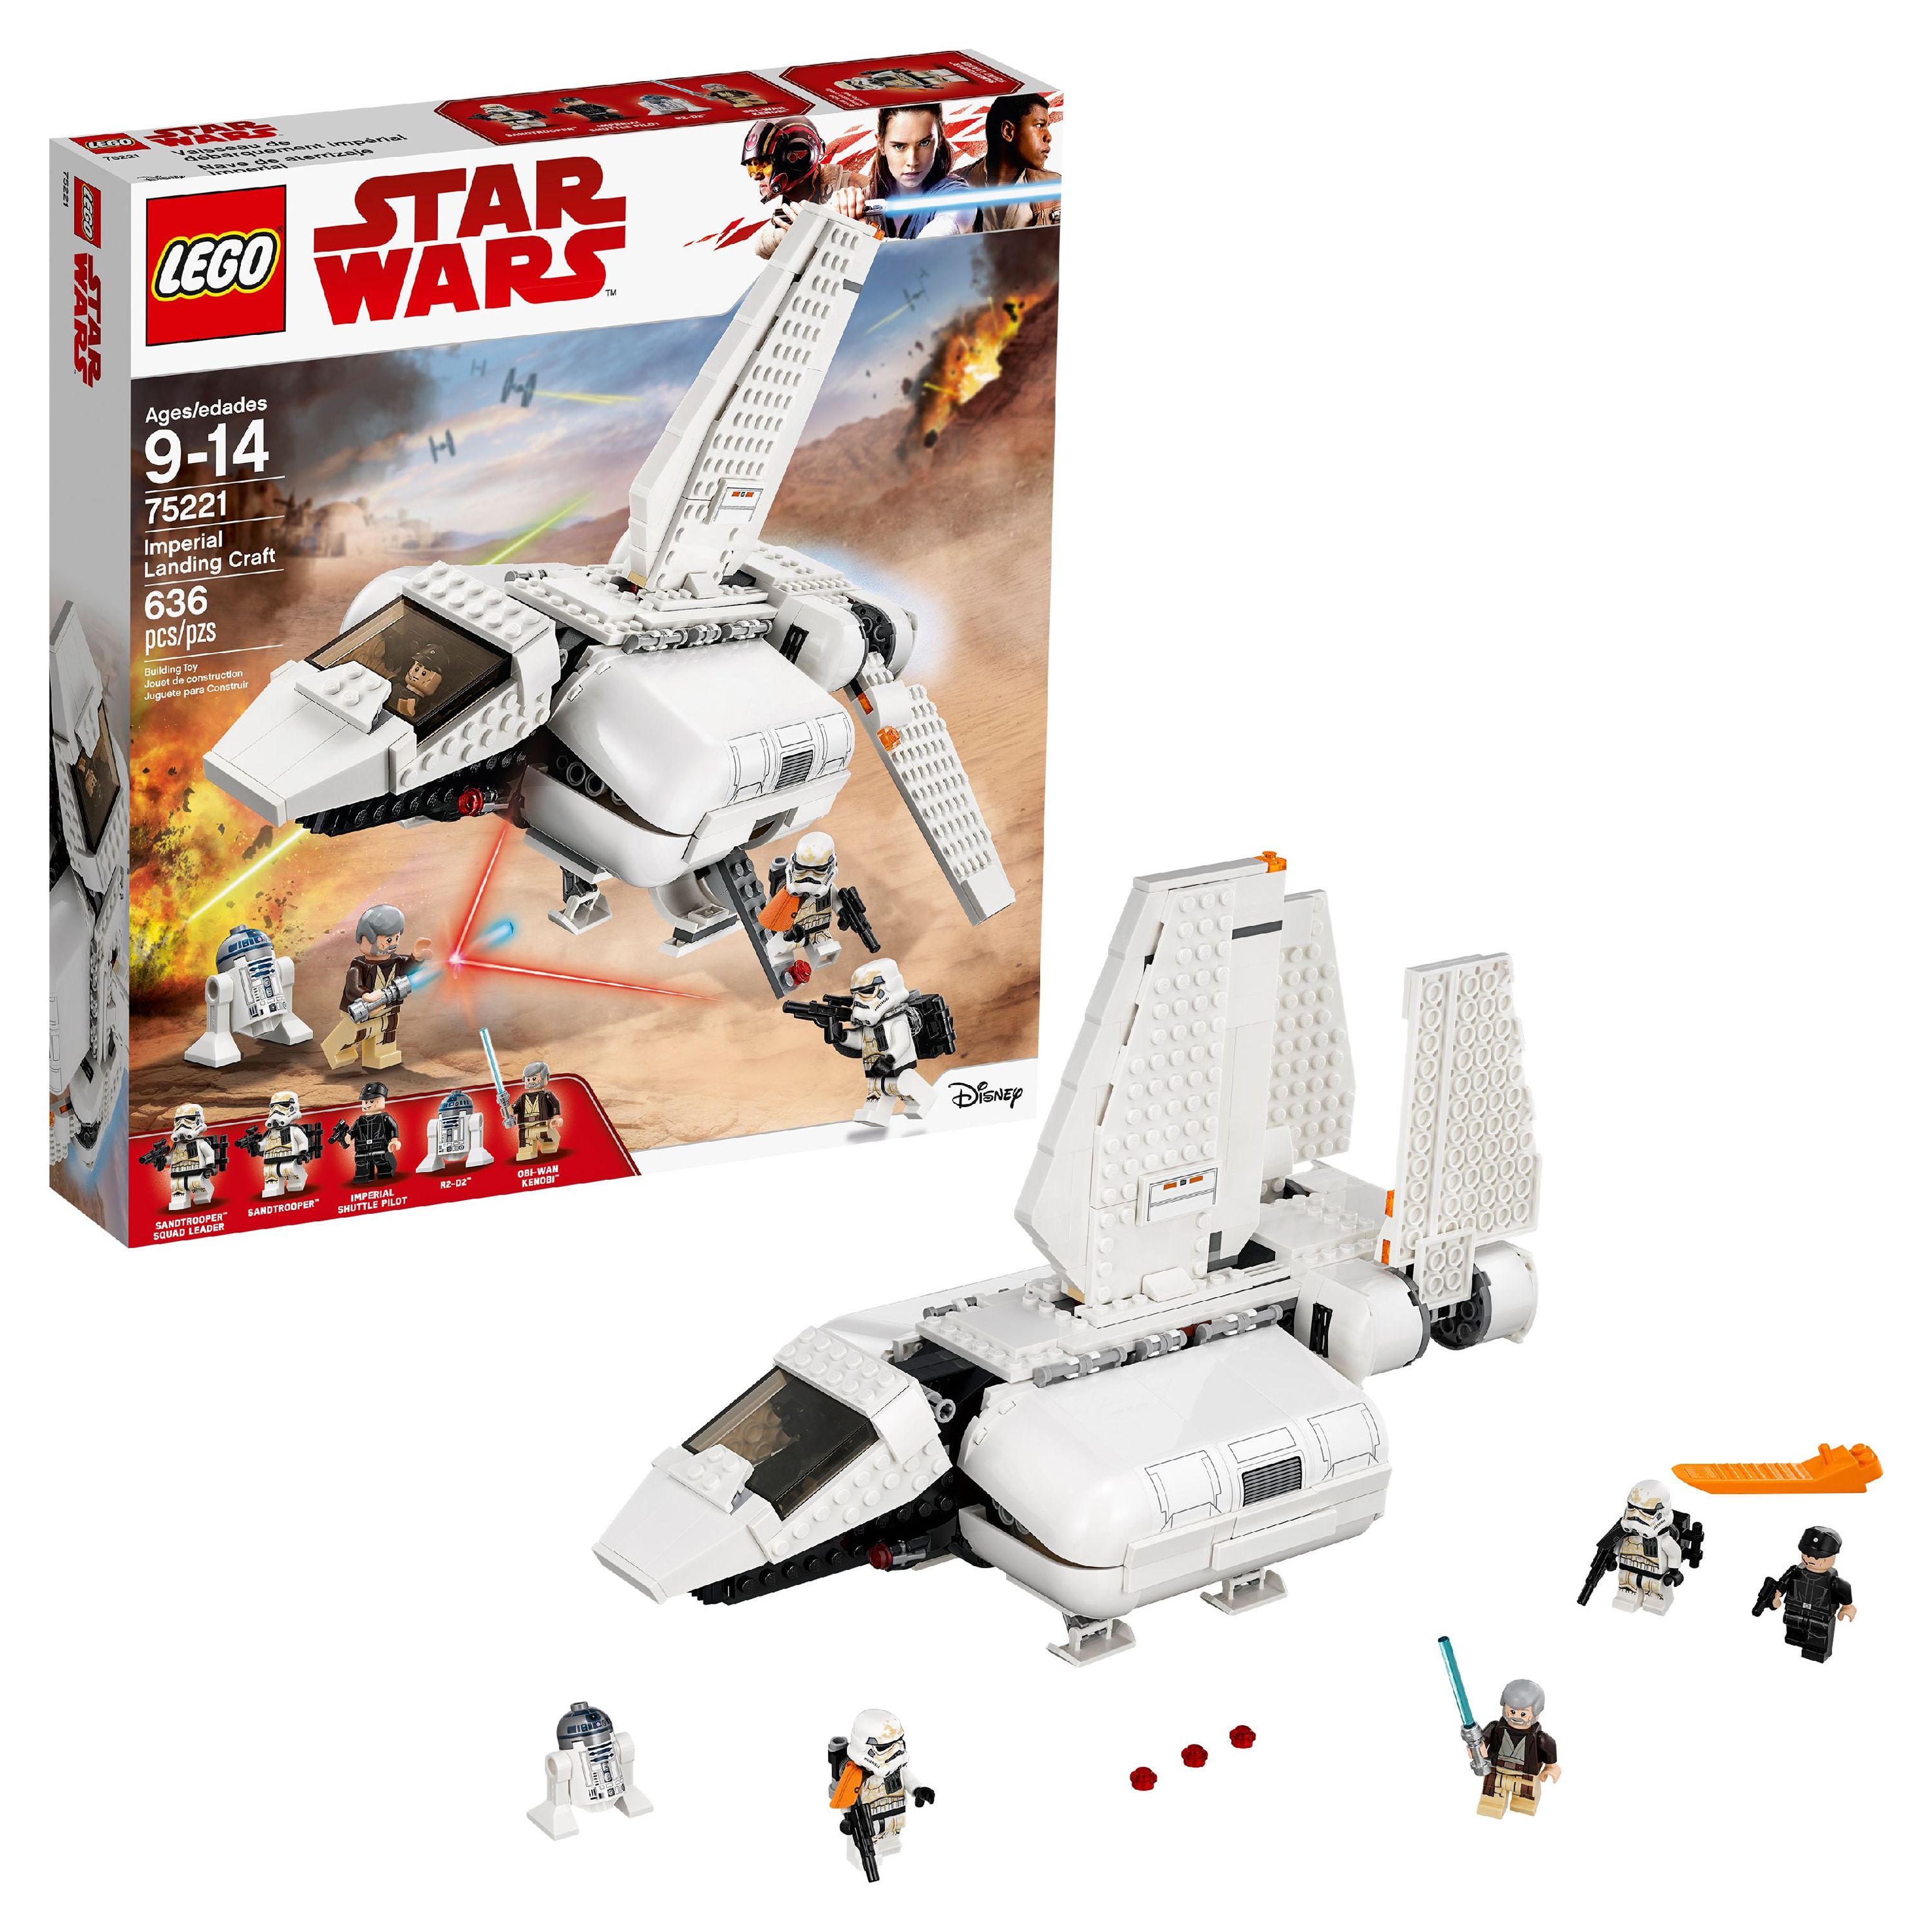 LEGO Star Wars Imperial Landing Craft 75221 - image 1 of 7